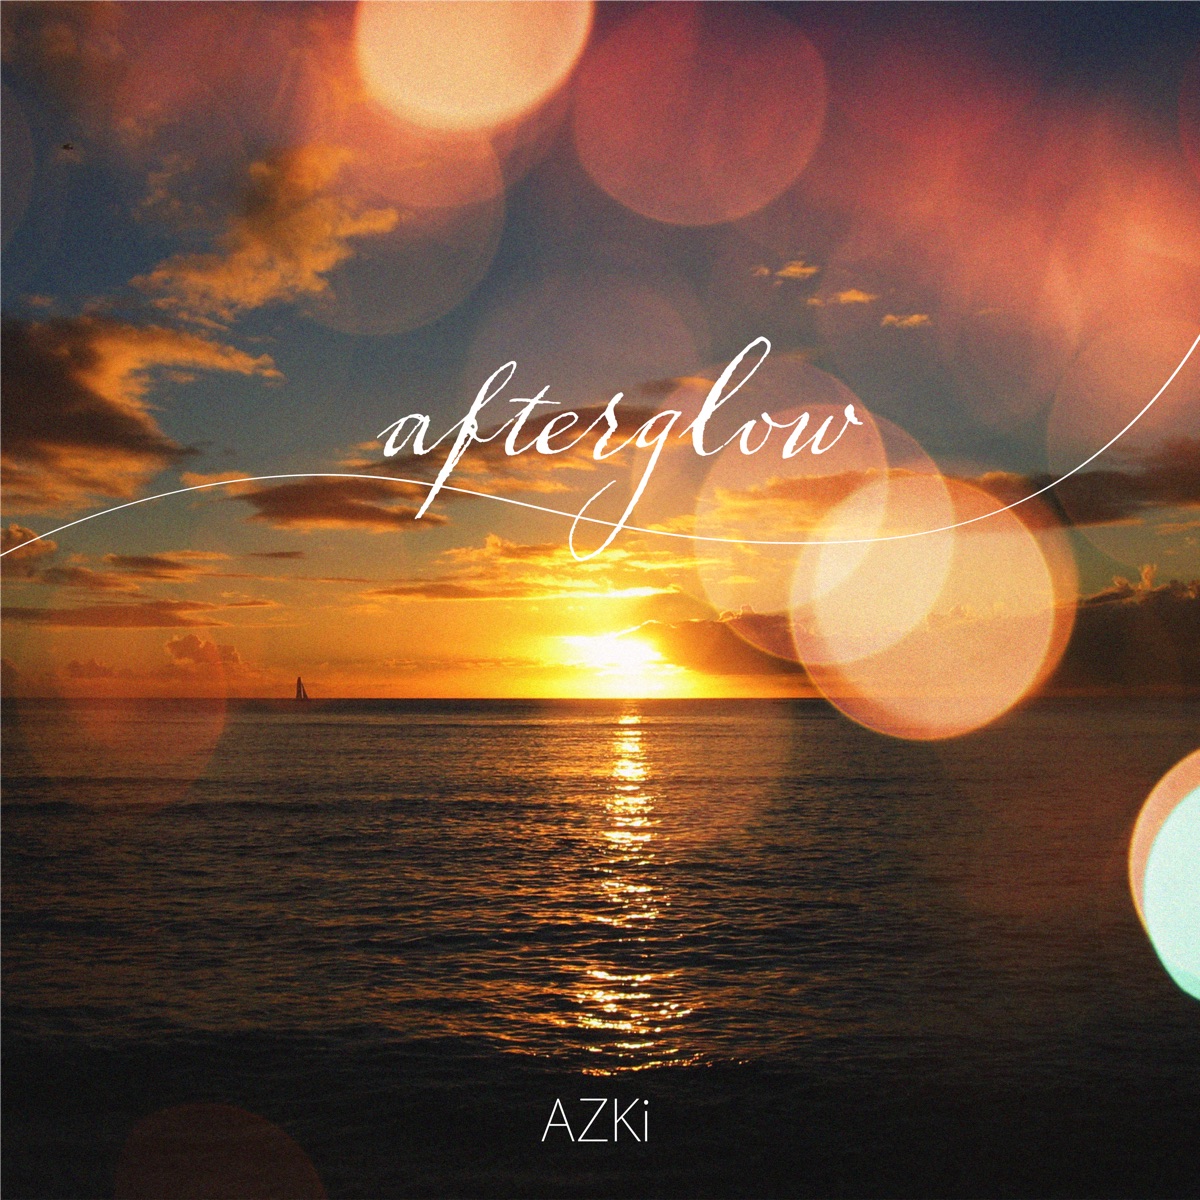 Cover art for『AZKi - afterglow』from the release『afterglow』